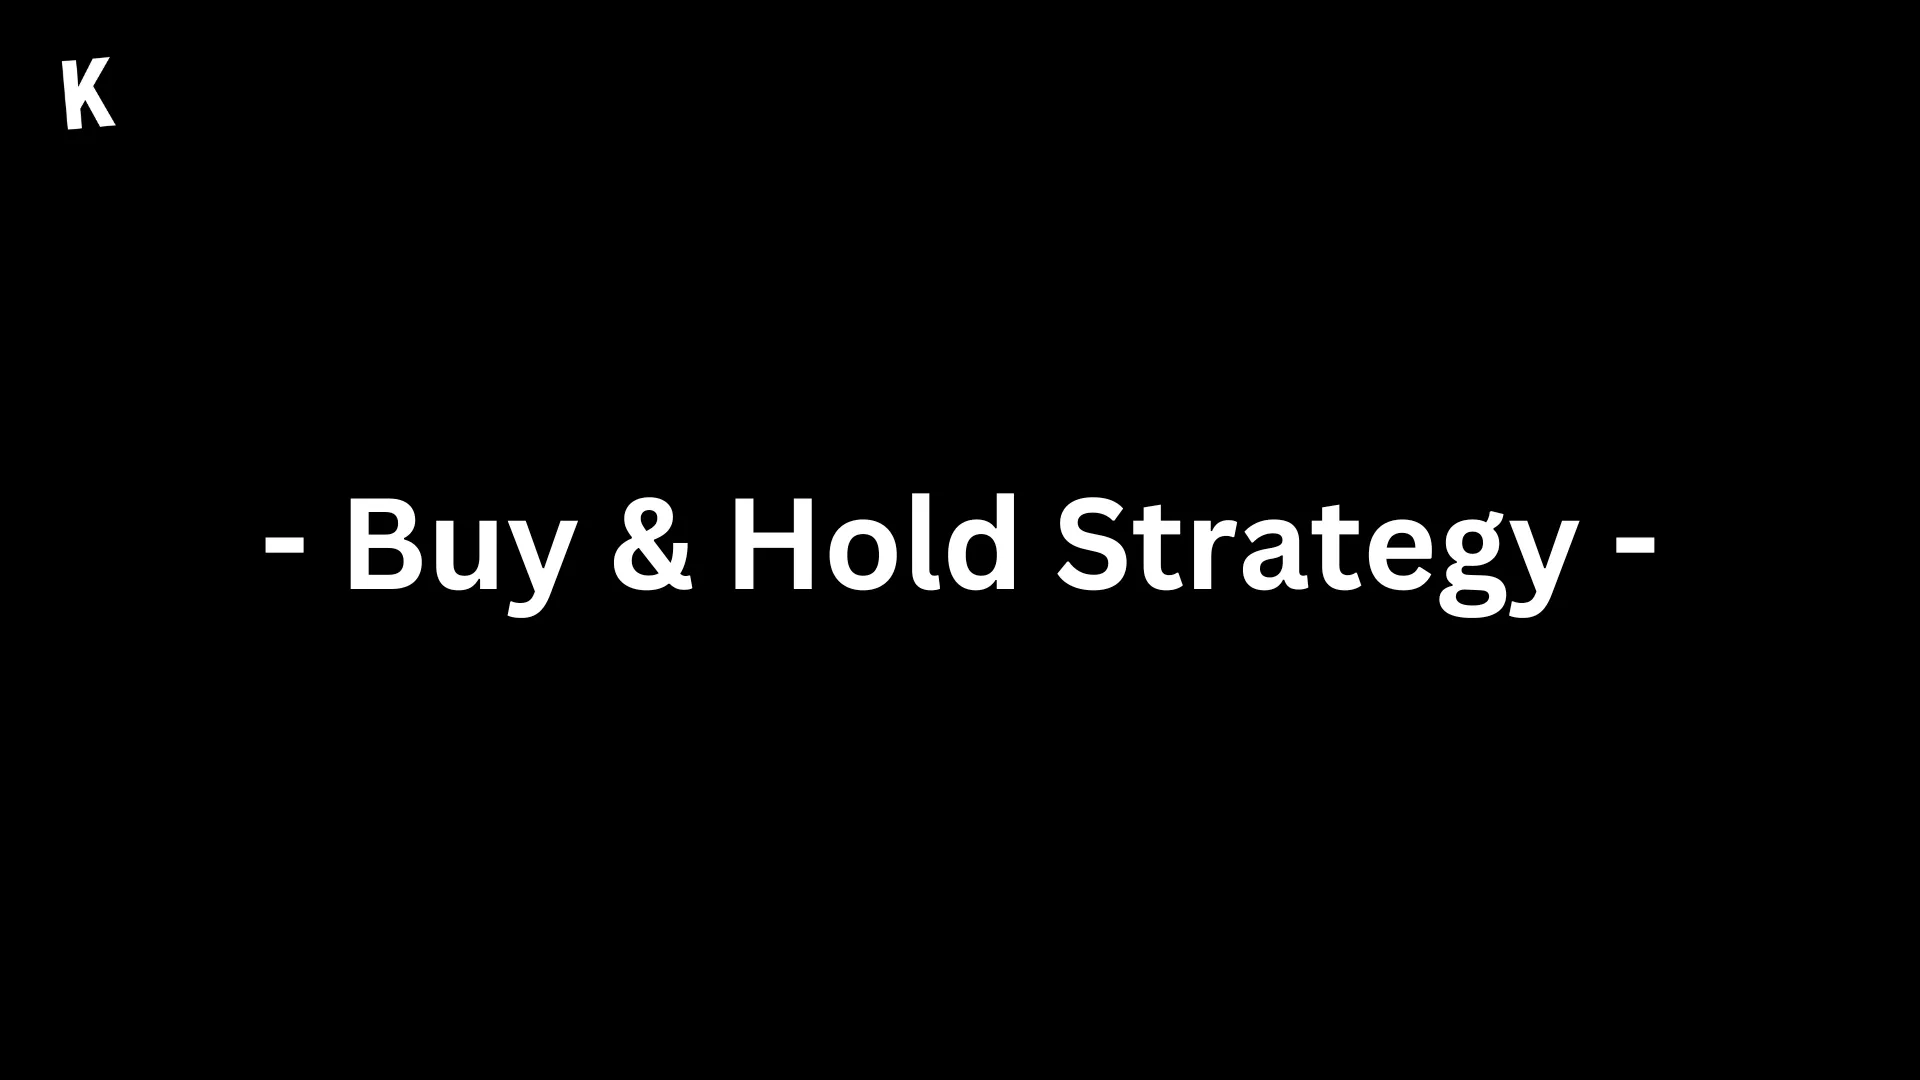 Buy & Hold Strategy